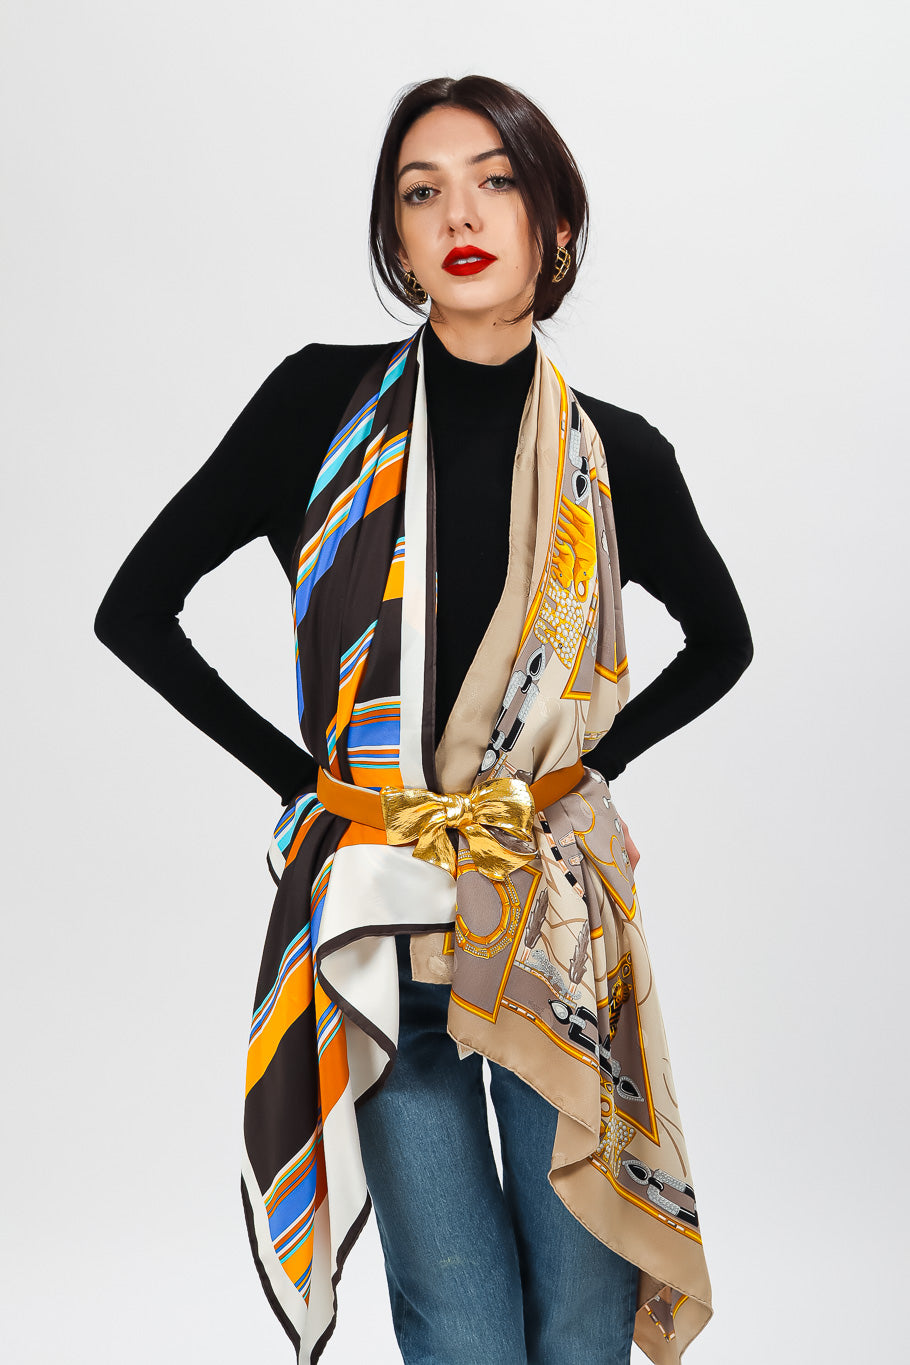 Amanda Rich in Vintage YSL and Cartier Scarves